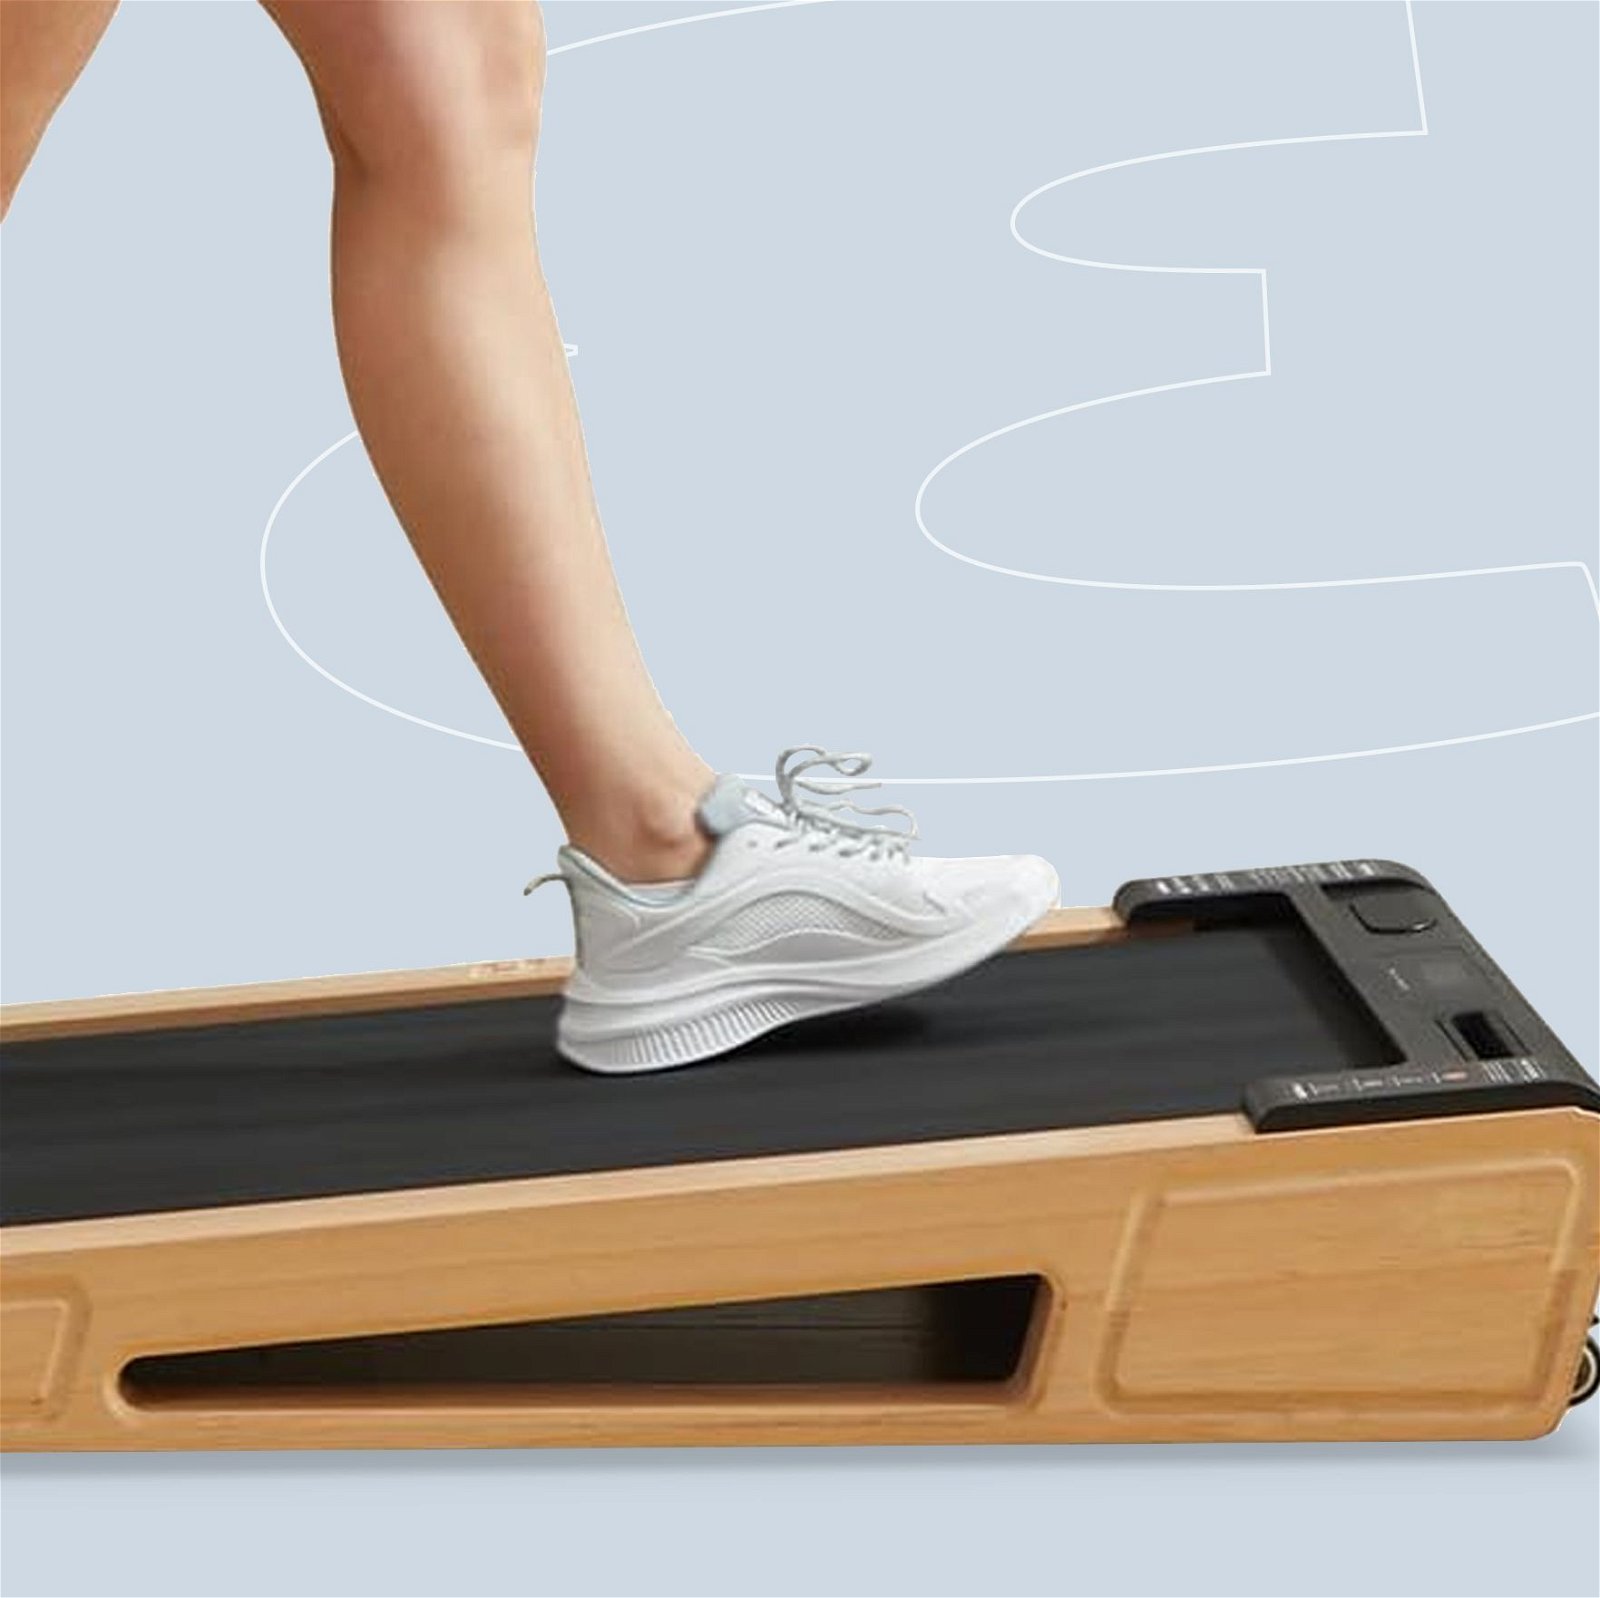 Get Your Steps in With These 10 Under-Desk Treadmills